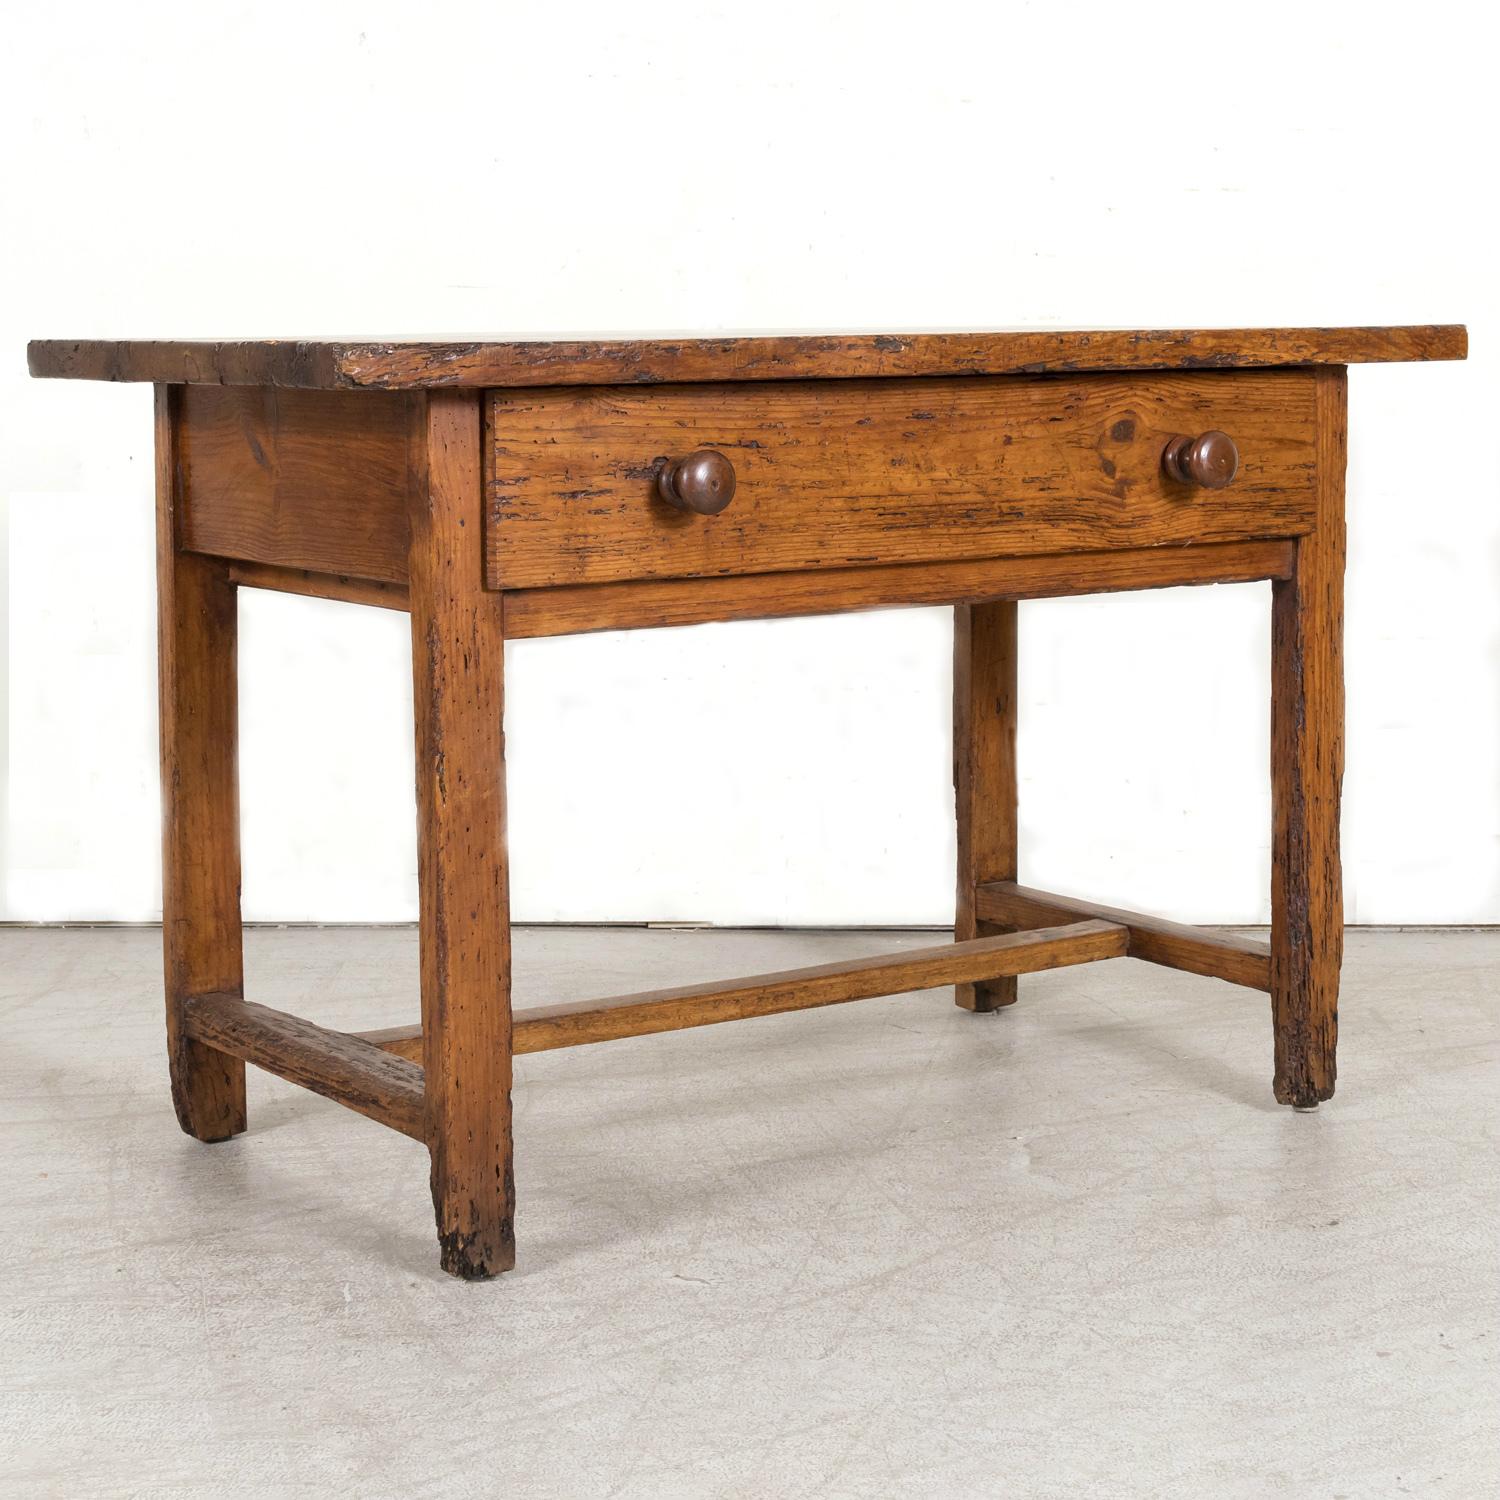 A wonderful 18th century French provincial primitive larch wood side table or desk, circa 1770s, handcrafted near Abondance, an attractive alpine village in the Haute-Savoie department in the Auvergne-Rhône-Alpes region in southeastern France just